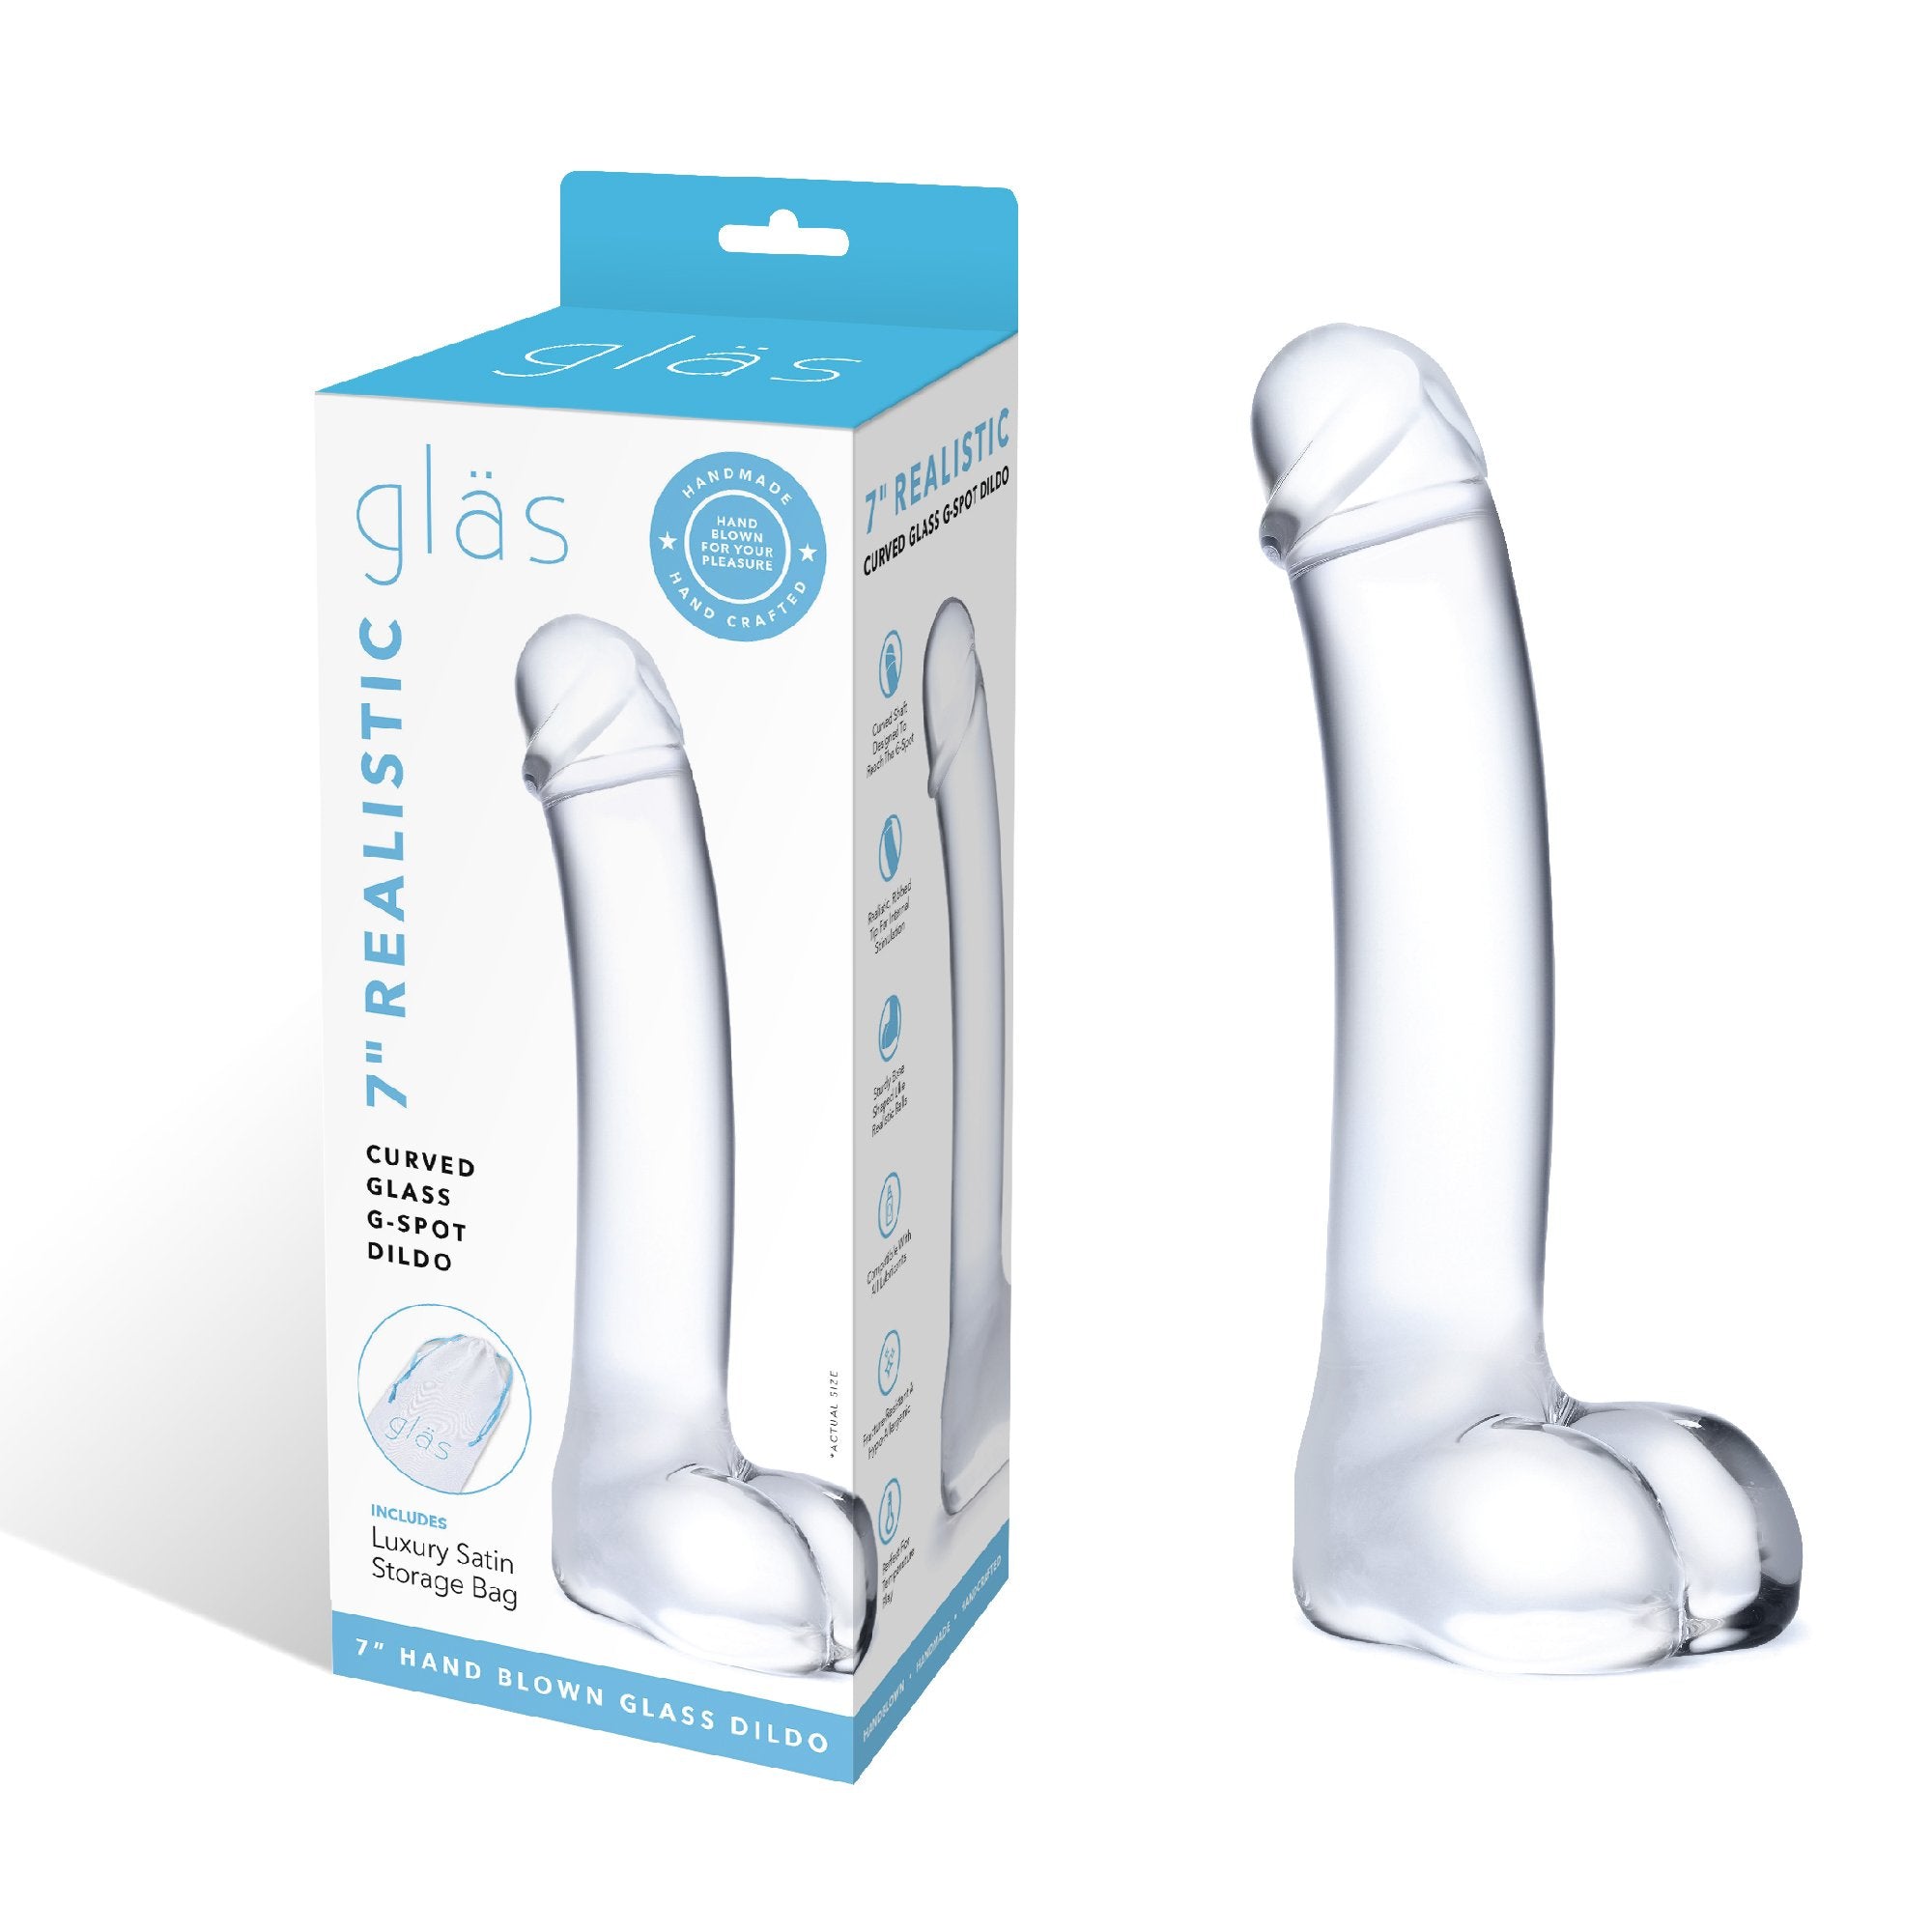 Packaging of the Gläs 7 inch Realistic Curved Glass G-Spot Dildo